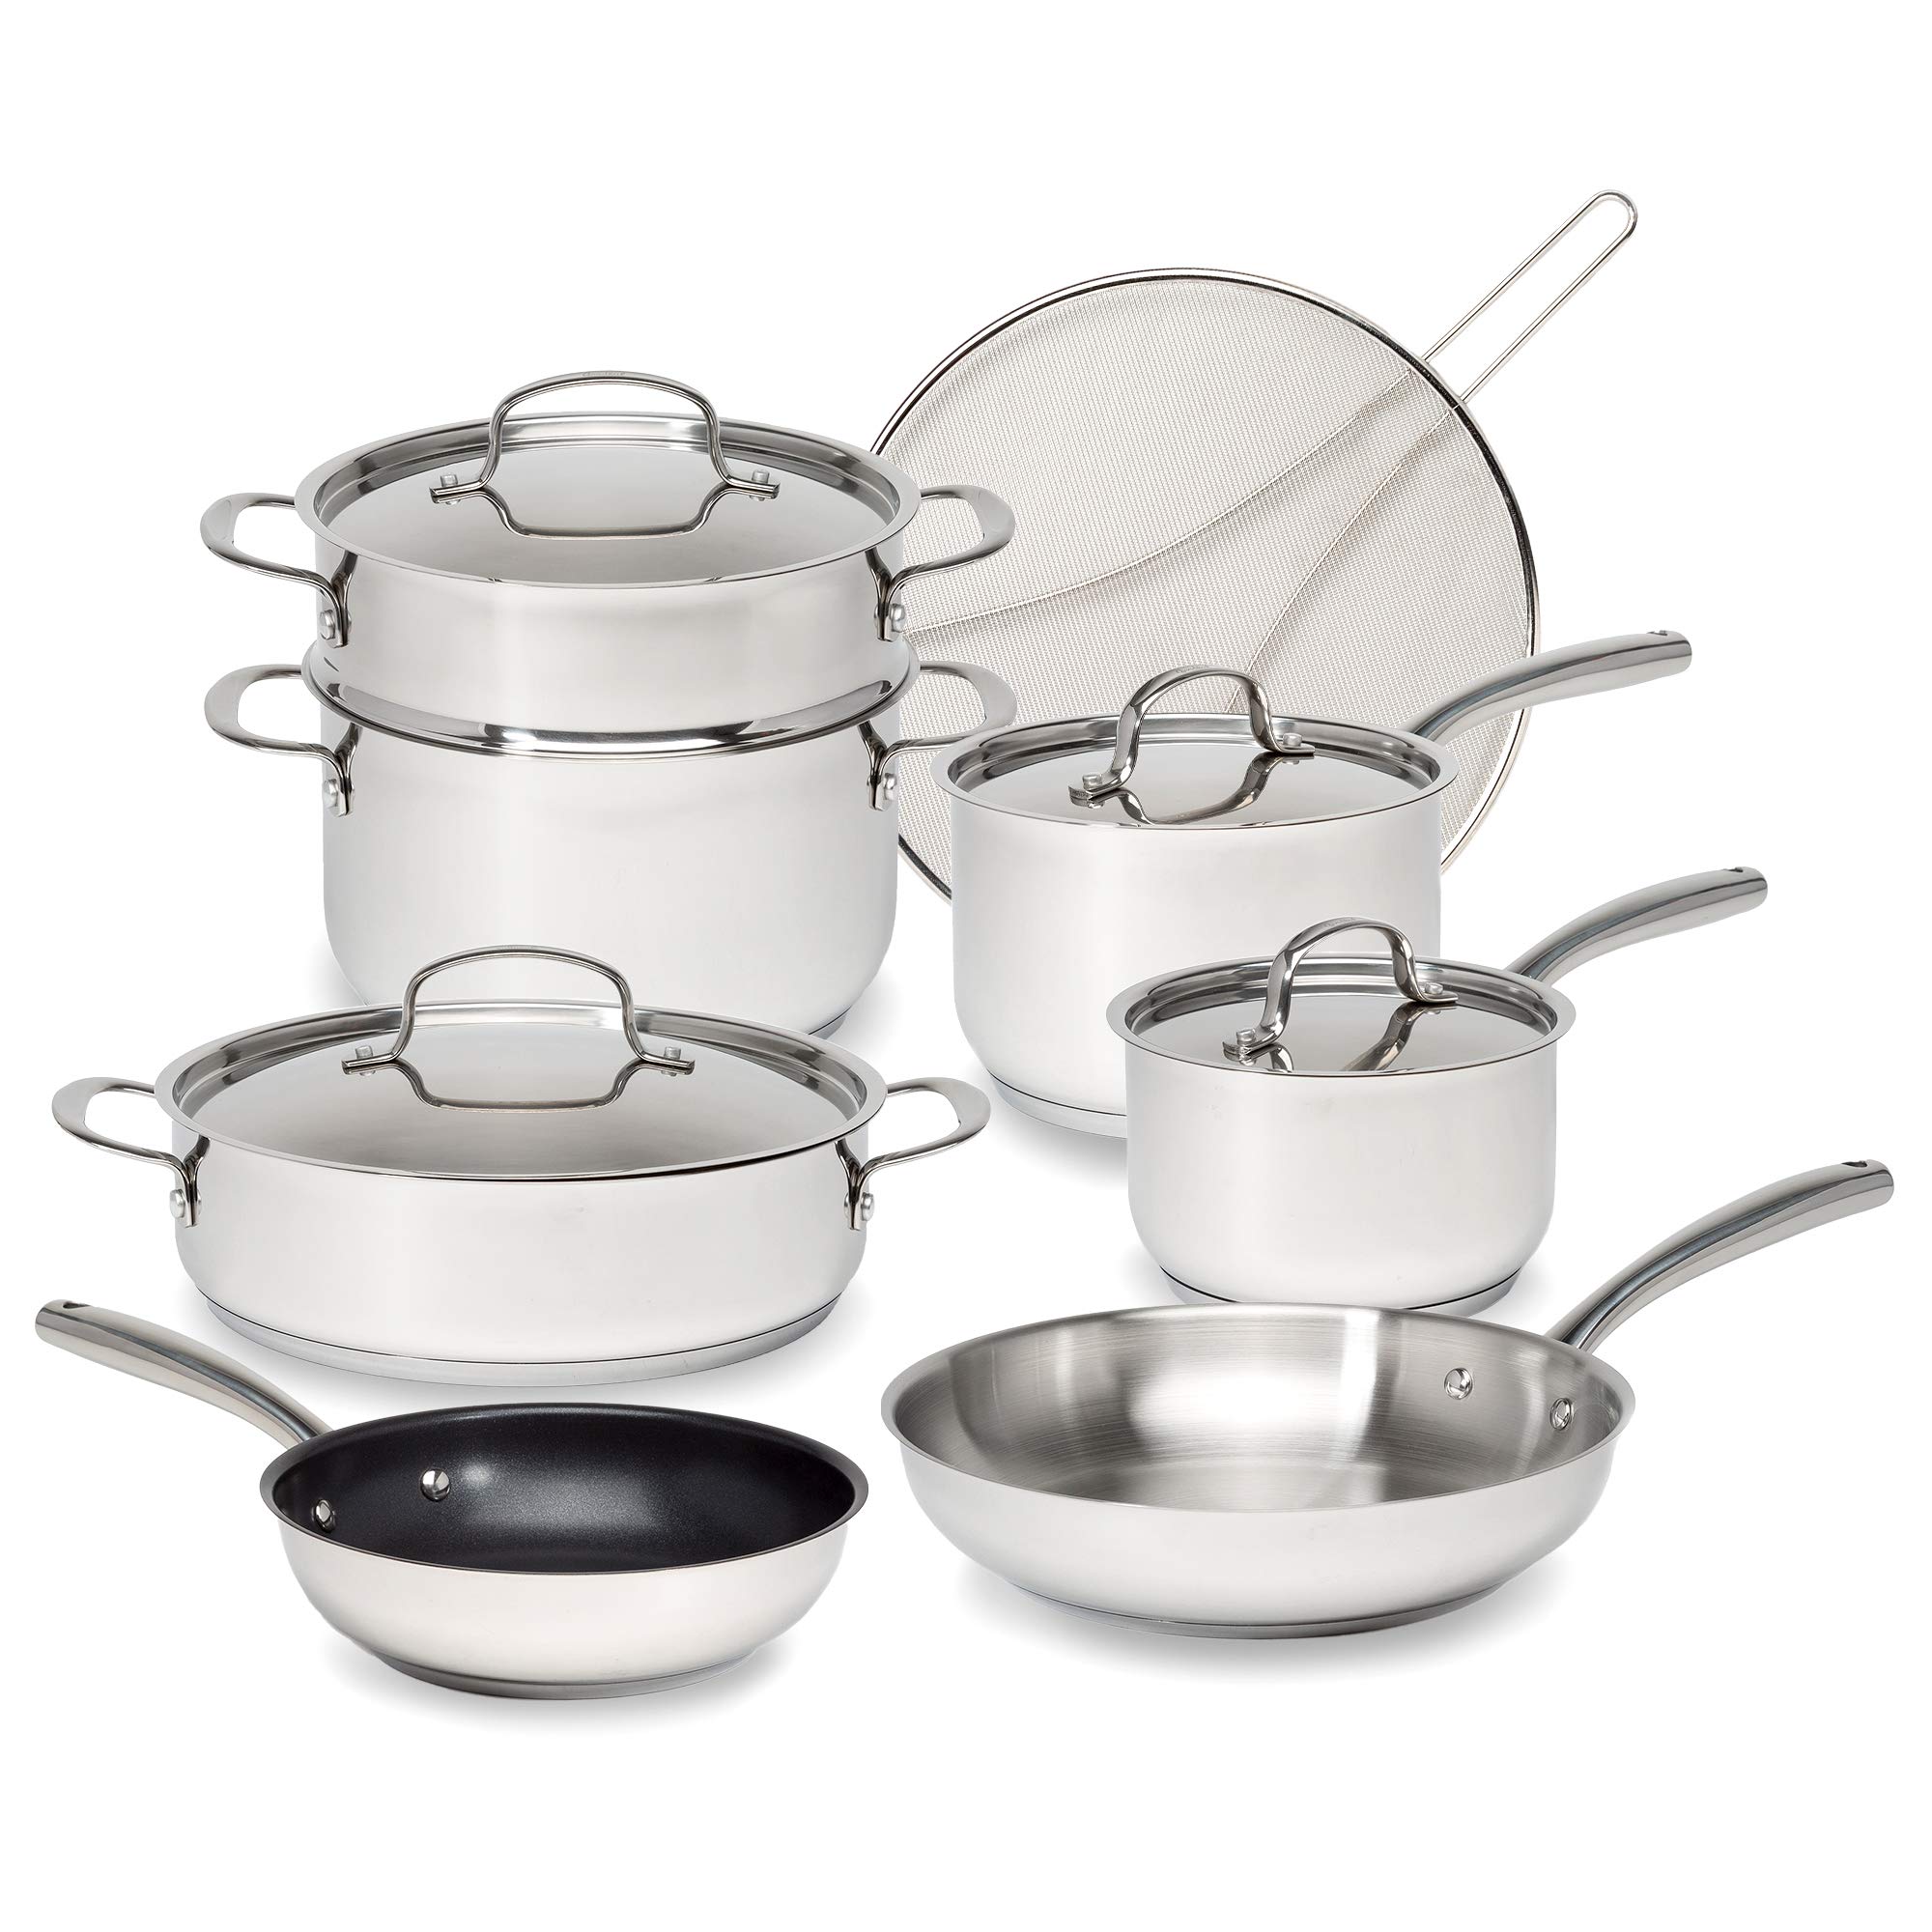 Goodful 12-Piece Classic Stainless Steel Cookware Set with Tri-Ply Base for Even Heating, Durable, Impact Bonded Pots and Pans, Dishwasher Safe Includes Non Stick Frying Pan, Chrome